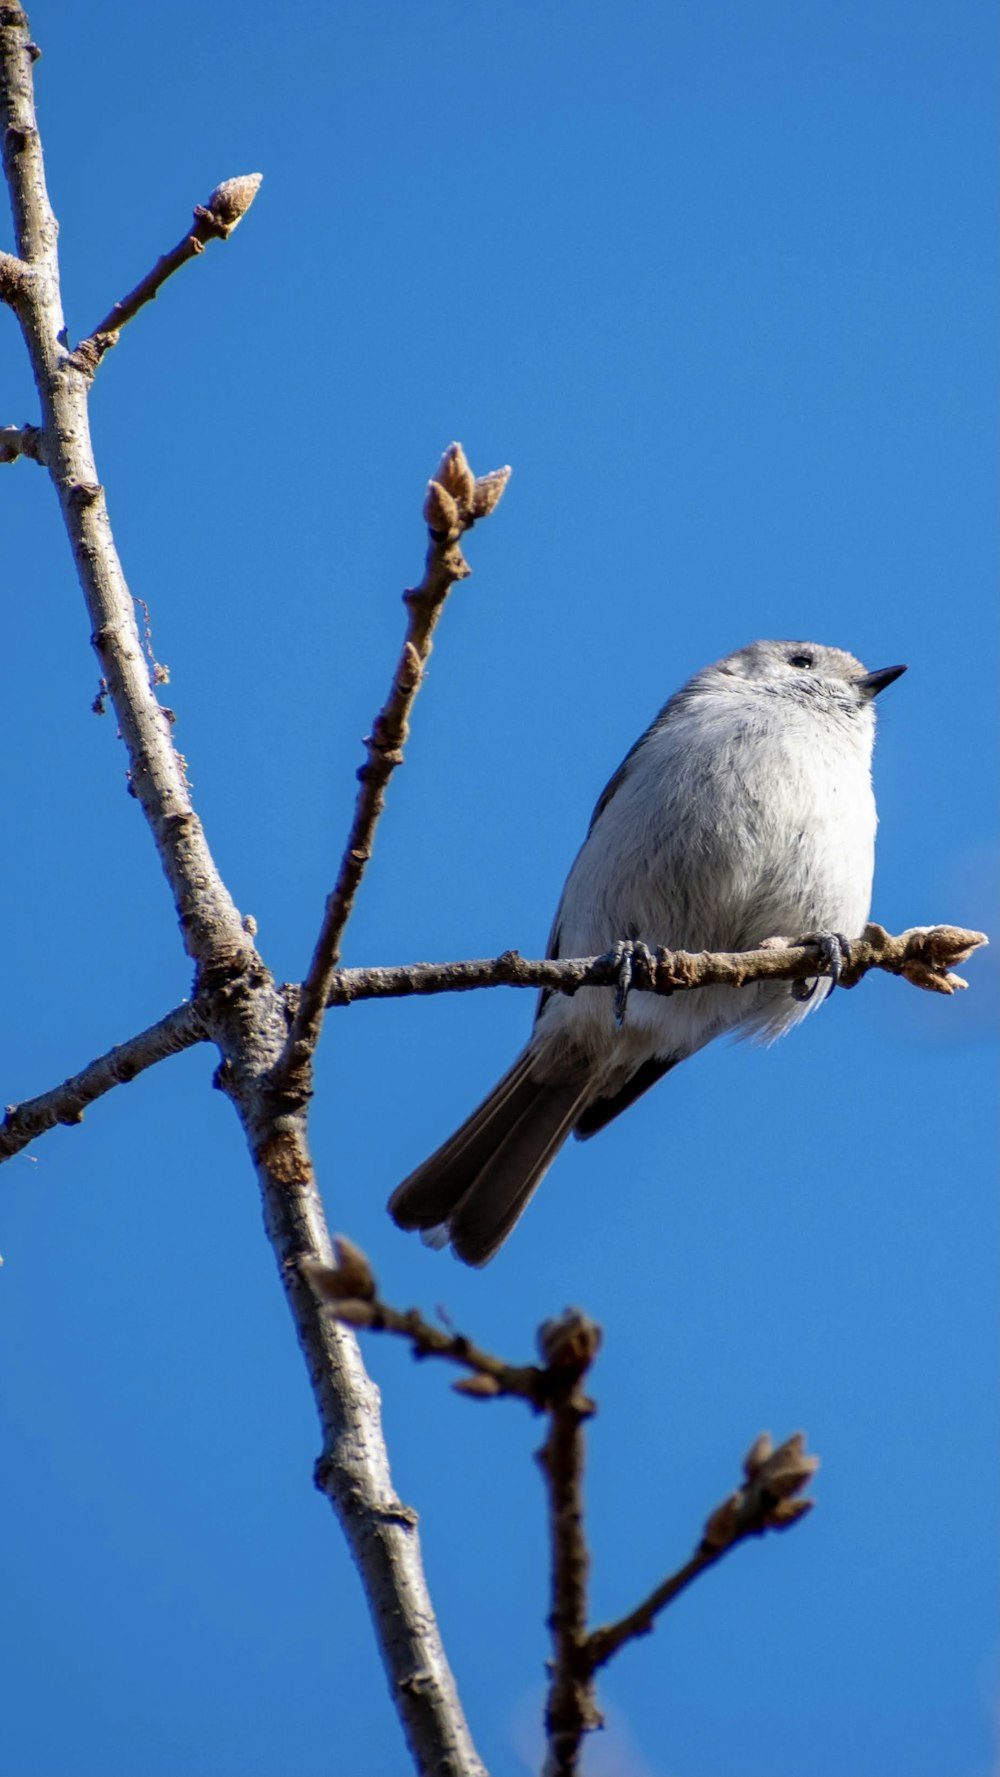 white and gray bird on brown tree branch during daytime